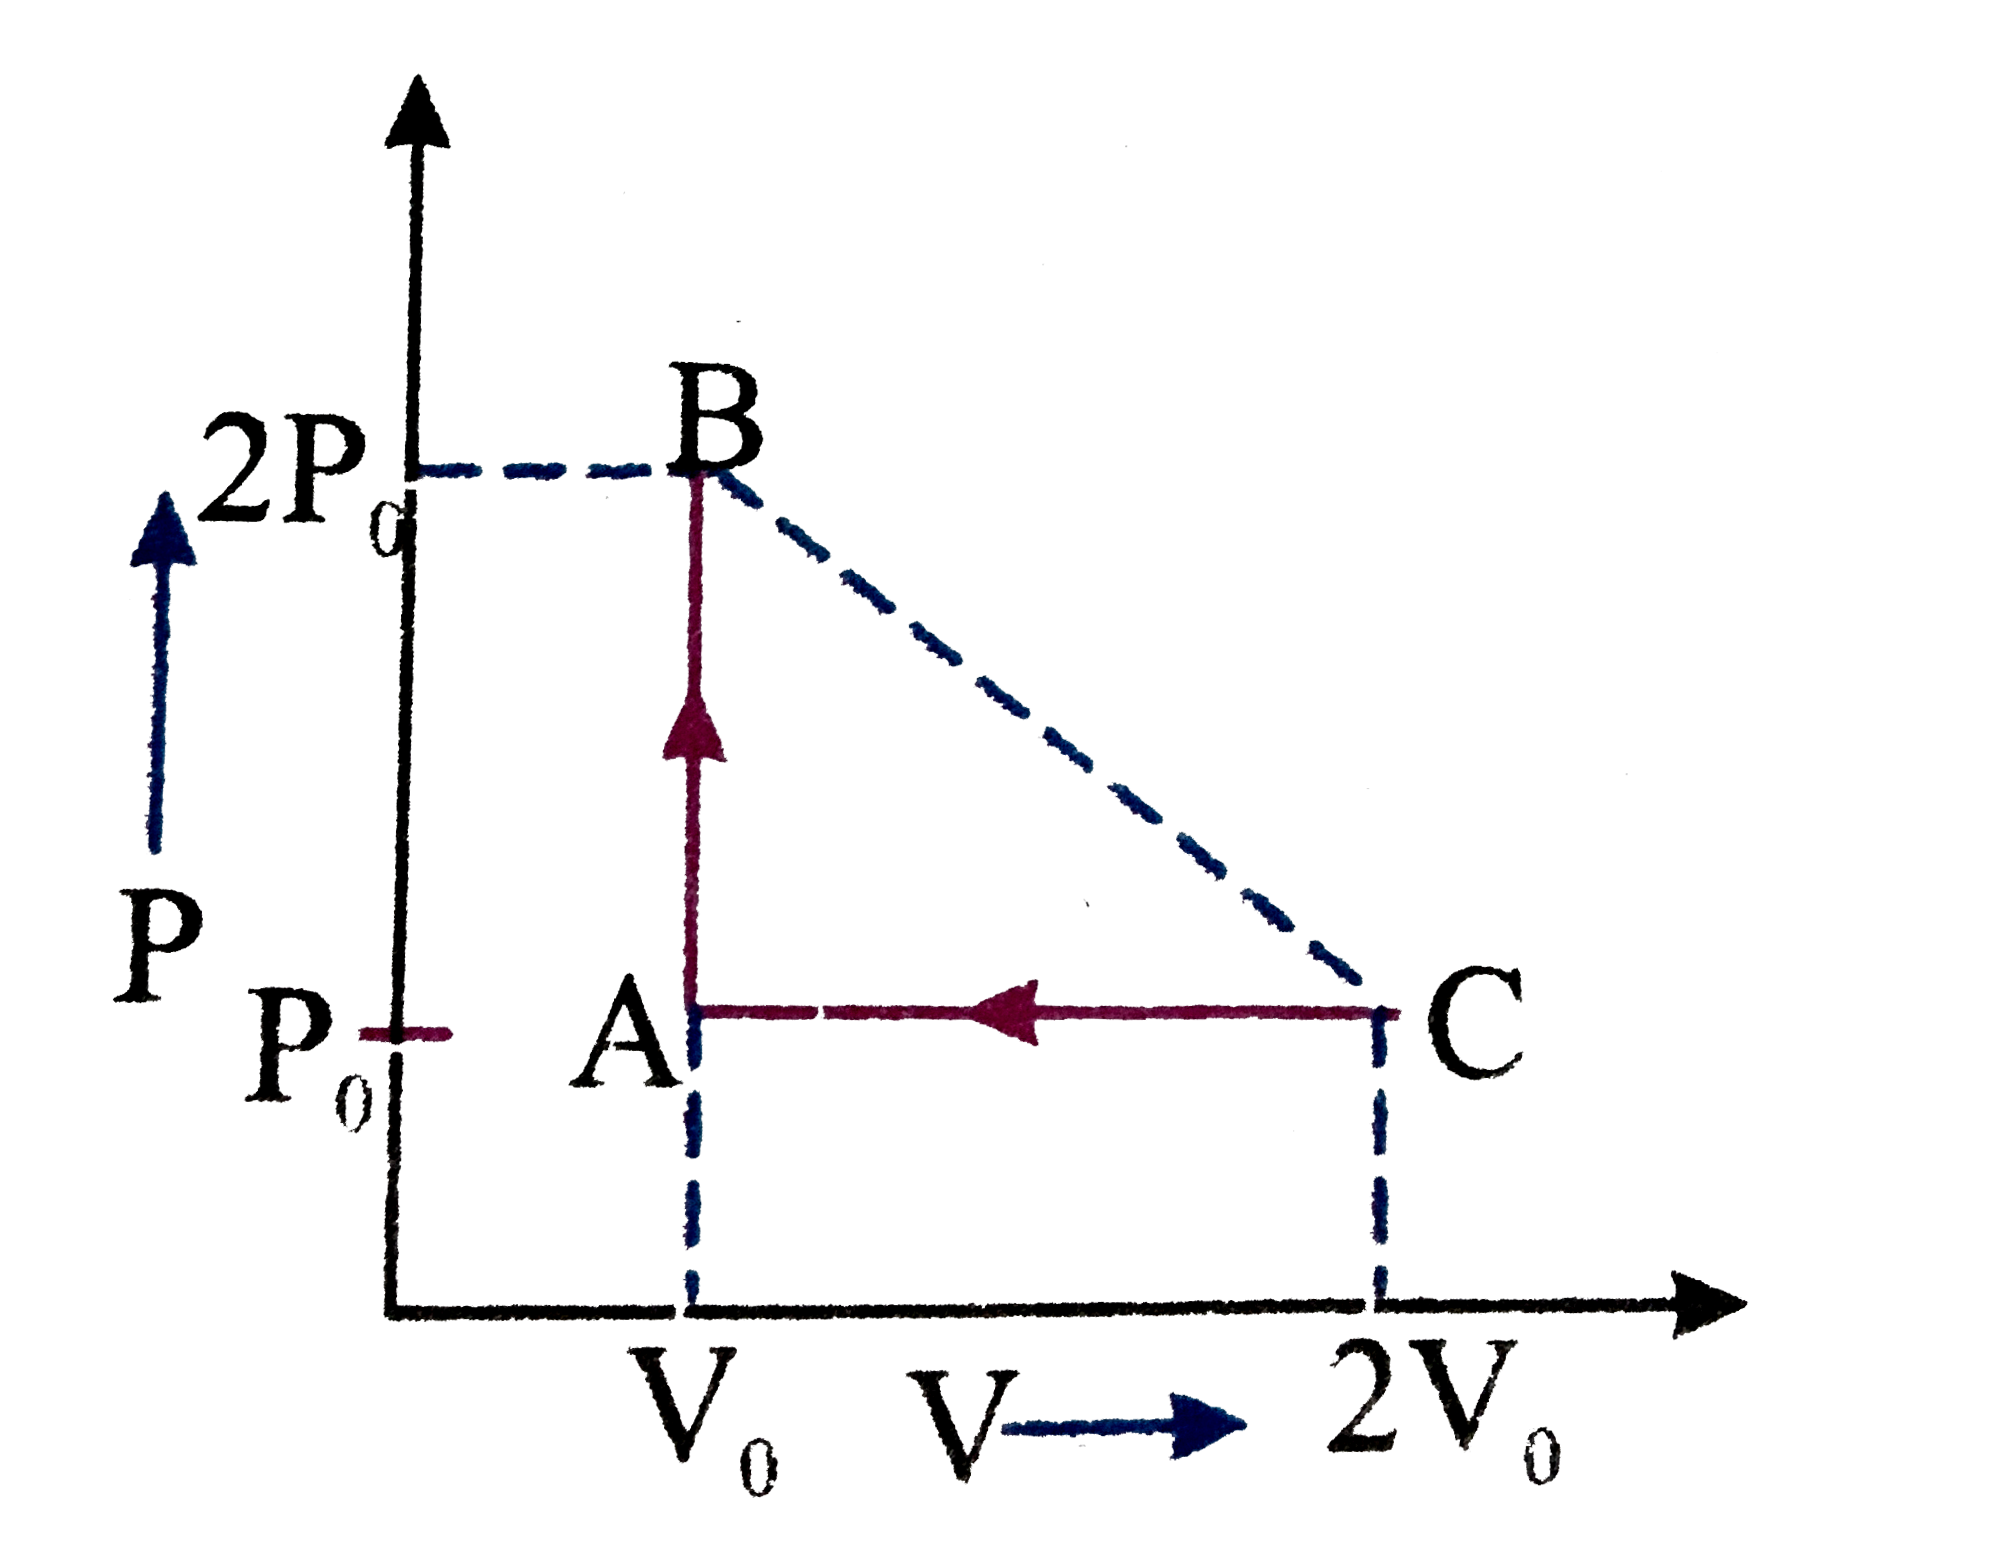 The figure shows P-V graph of an ideal on molegas undergone to cyclic process ABCD then the process BrarrC is